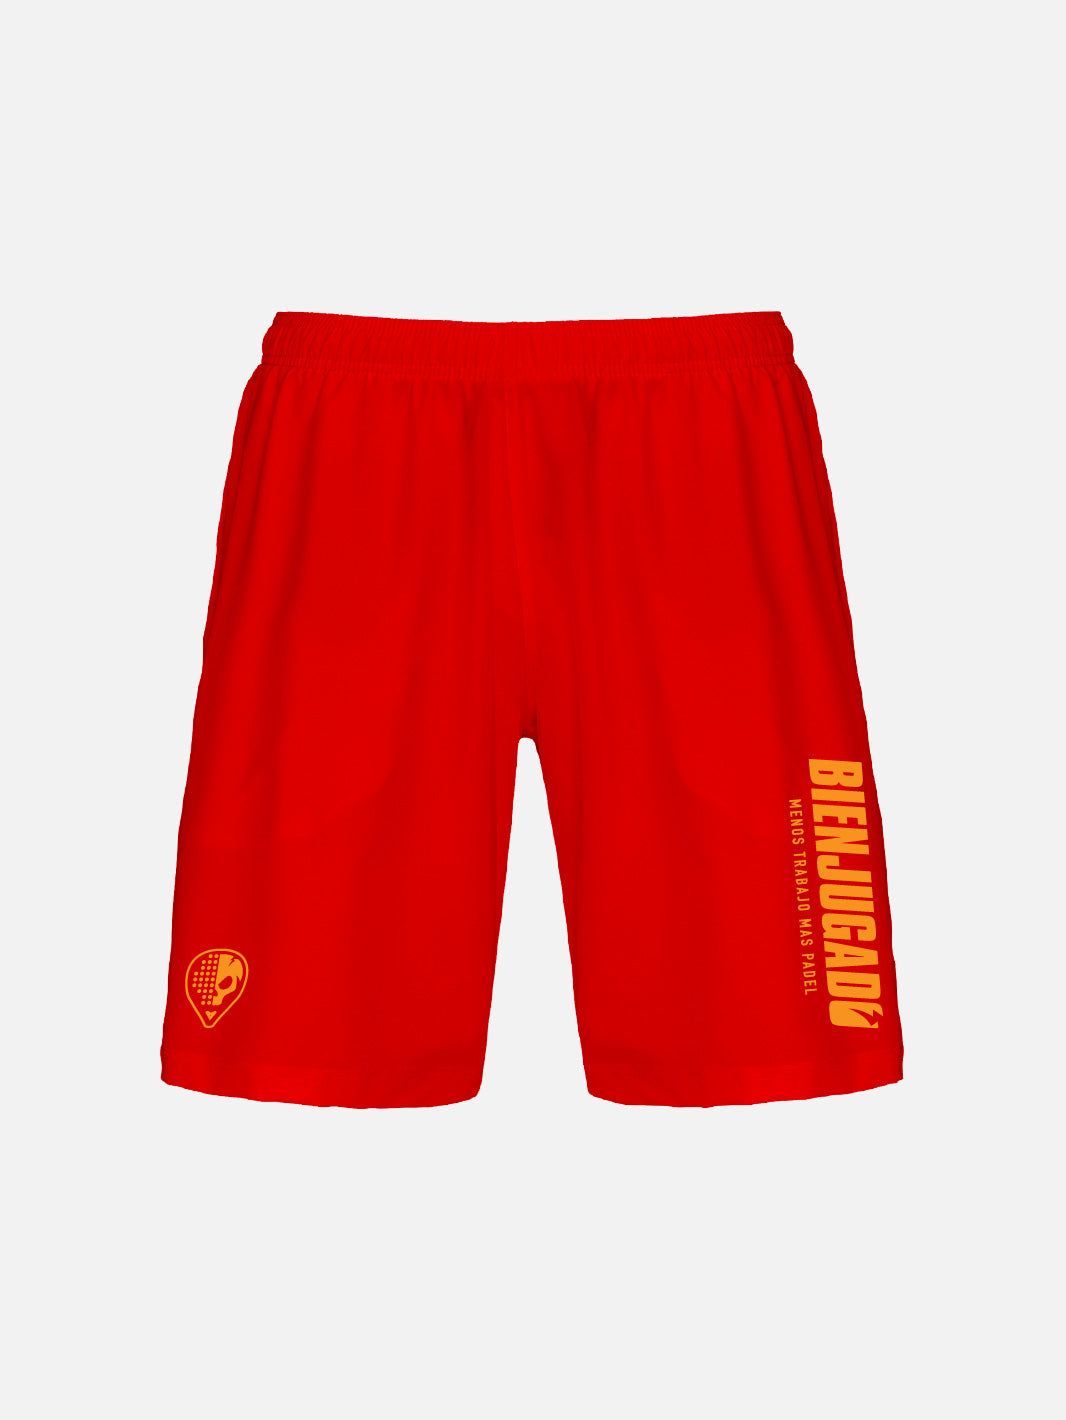 Men'S Shorts - Red